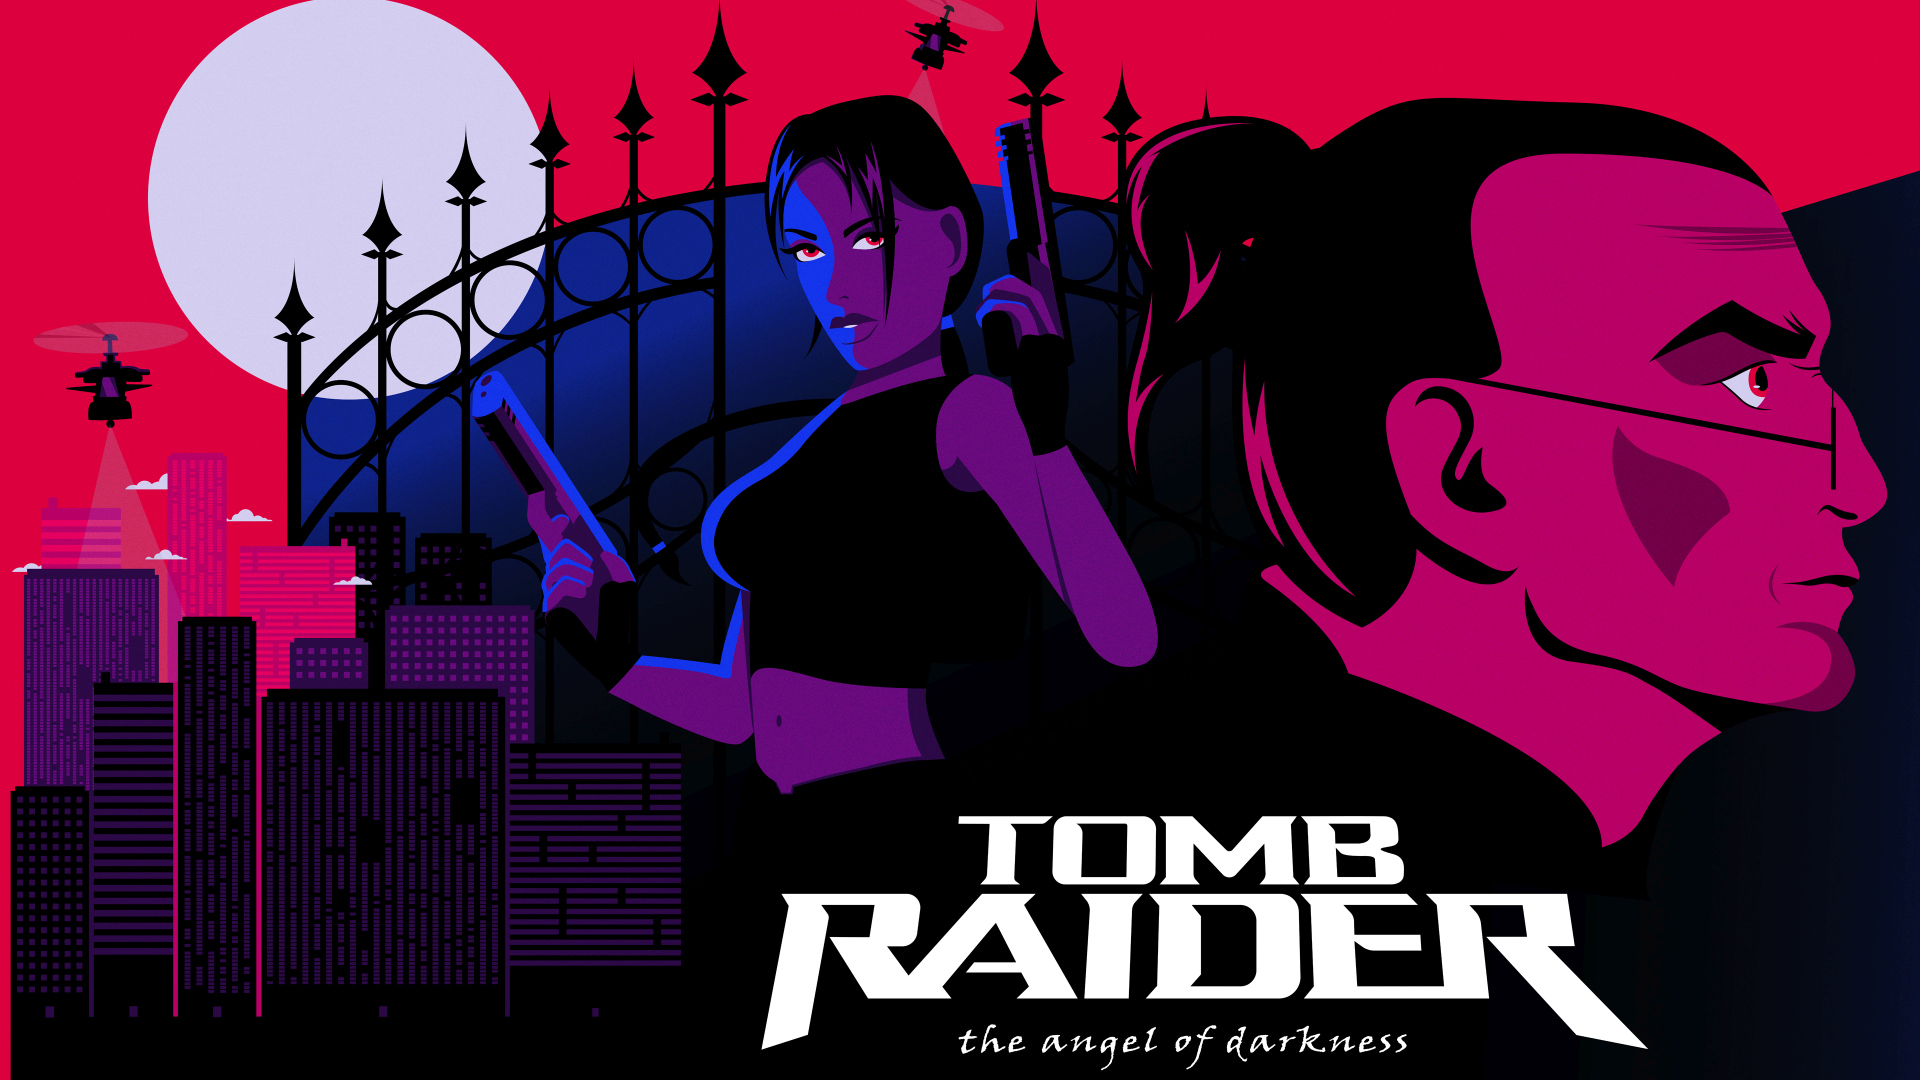 Reimagined Tomb Raider: The Angel of Darkness box art by Nathan Johnson